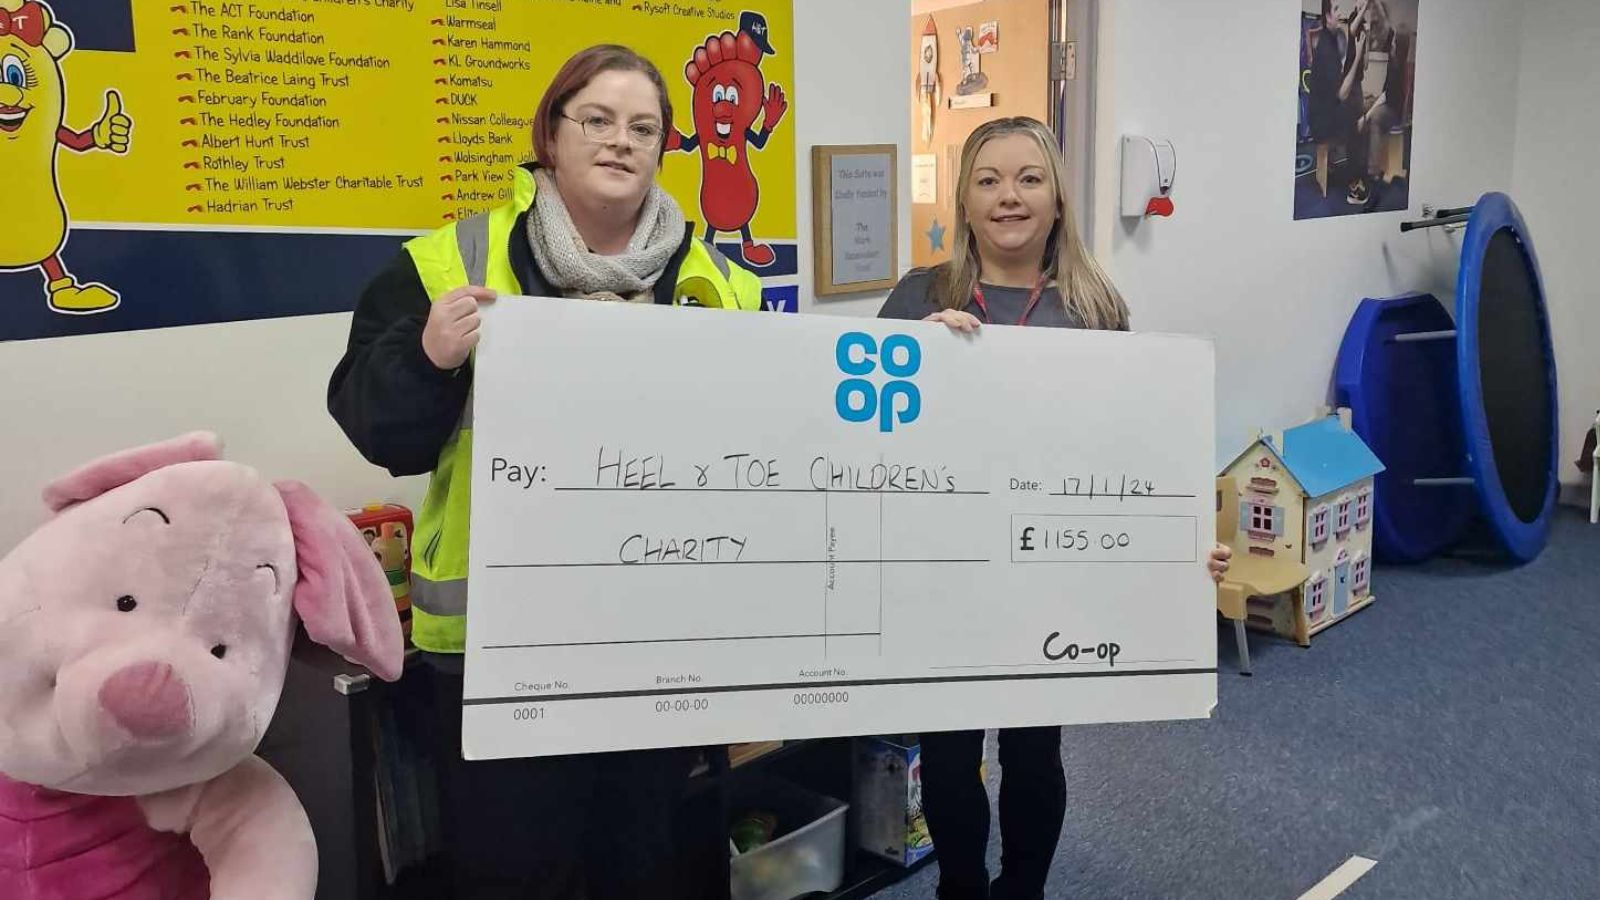 Children’s charity receives donation from Co-operative depot